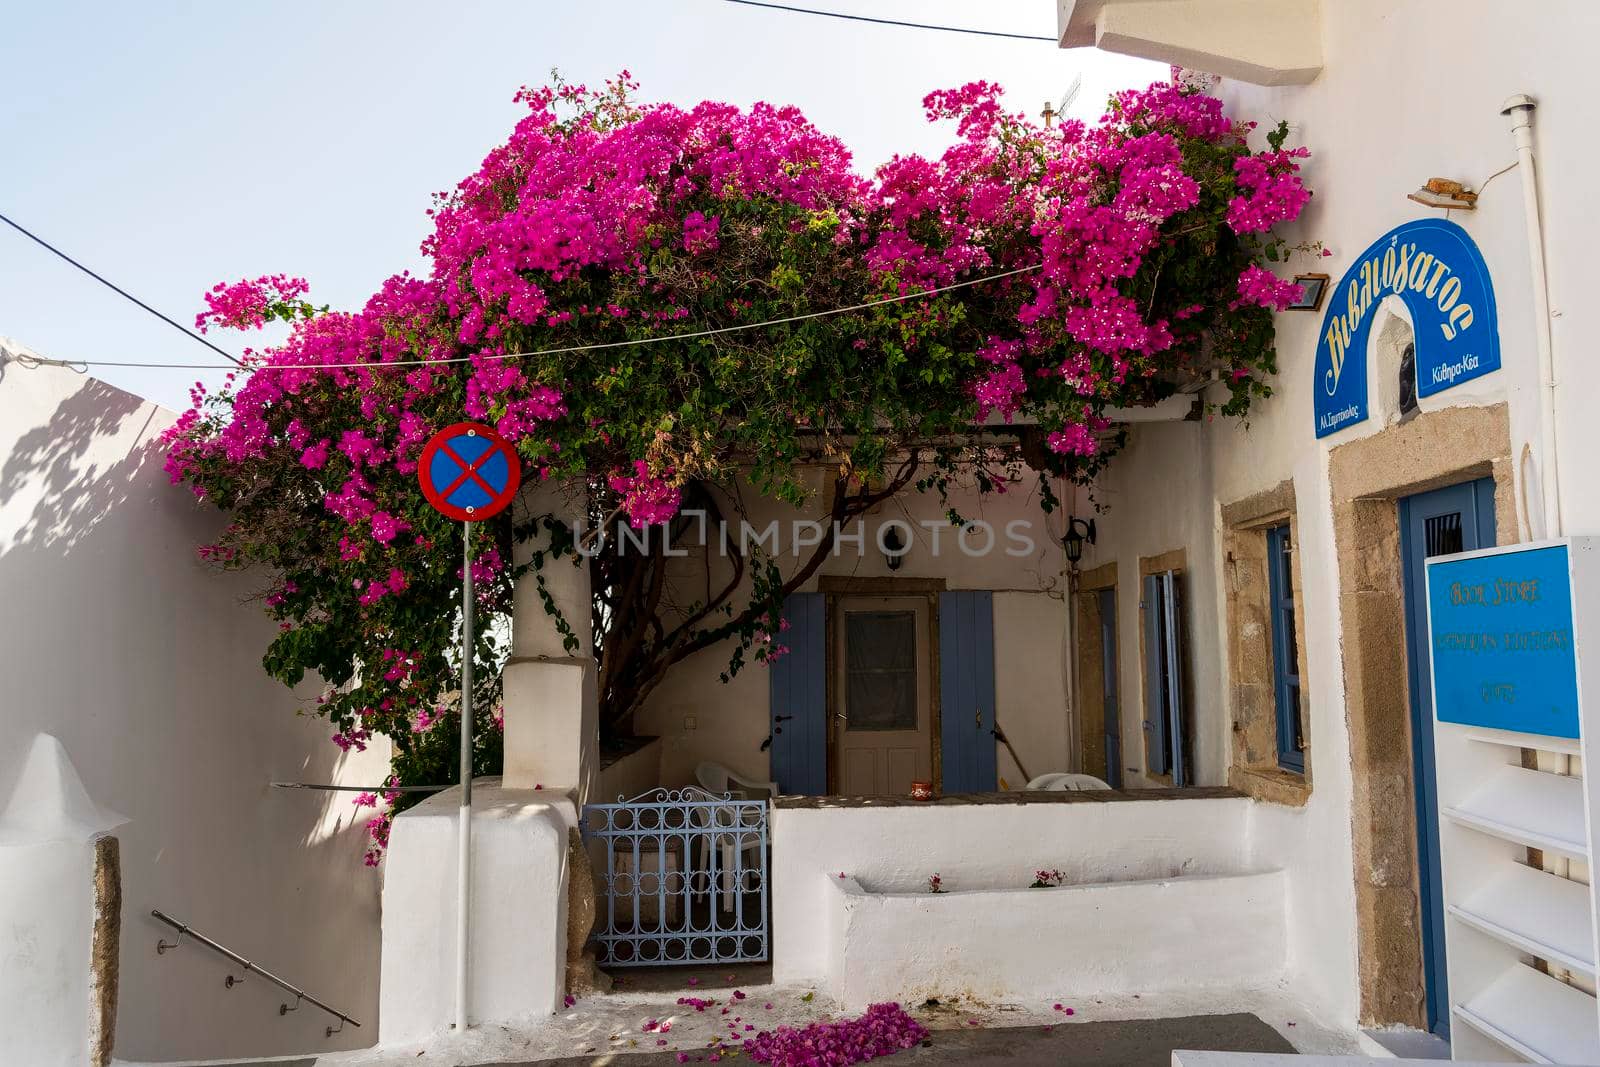 Kythira, Greece - August 26, 2021: Traditional house in the traditional settlement of Chora, the capital of Kythira island, Greece. Typical architecture of whitewashed house blue wooden door and red bougainvillea.